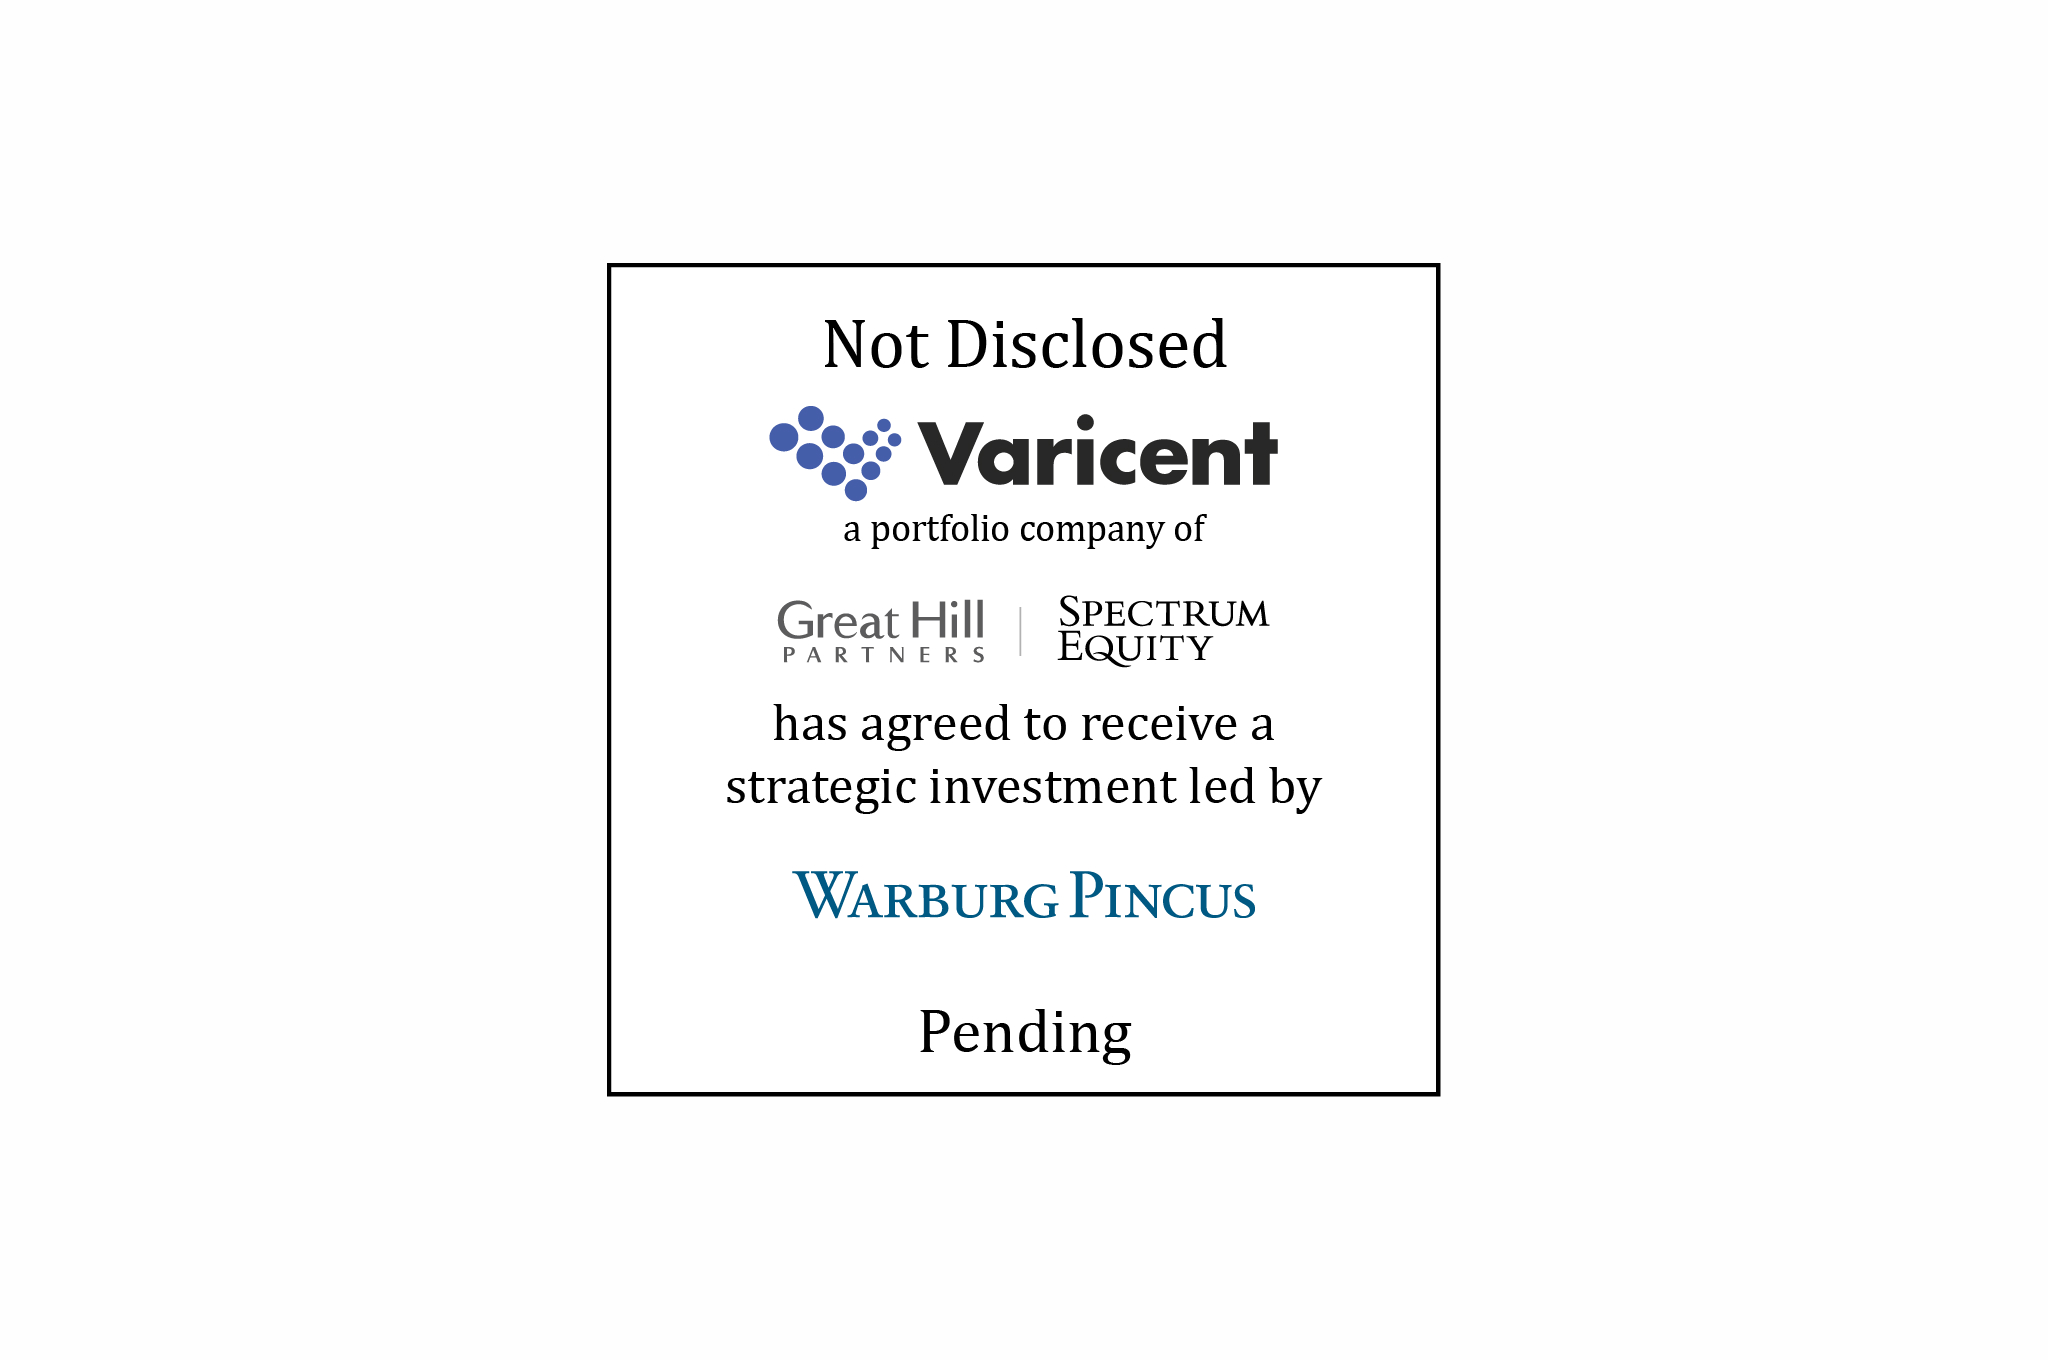 Not Disclosed - Varicent a portfolio company of Great Hill Partners | Spectrum Equity has agreed to receive a strategic investment led by Warburg Pincus - Pending